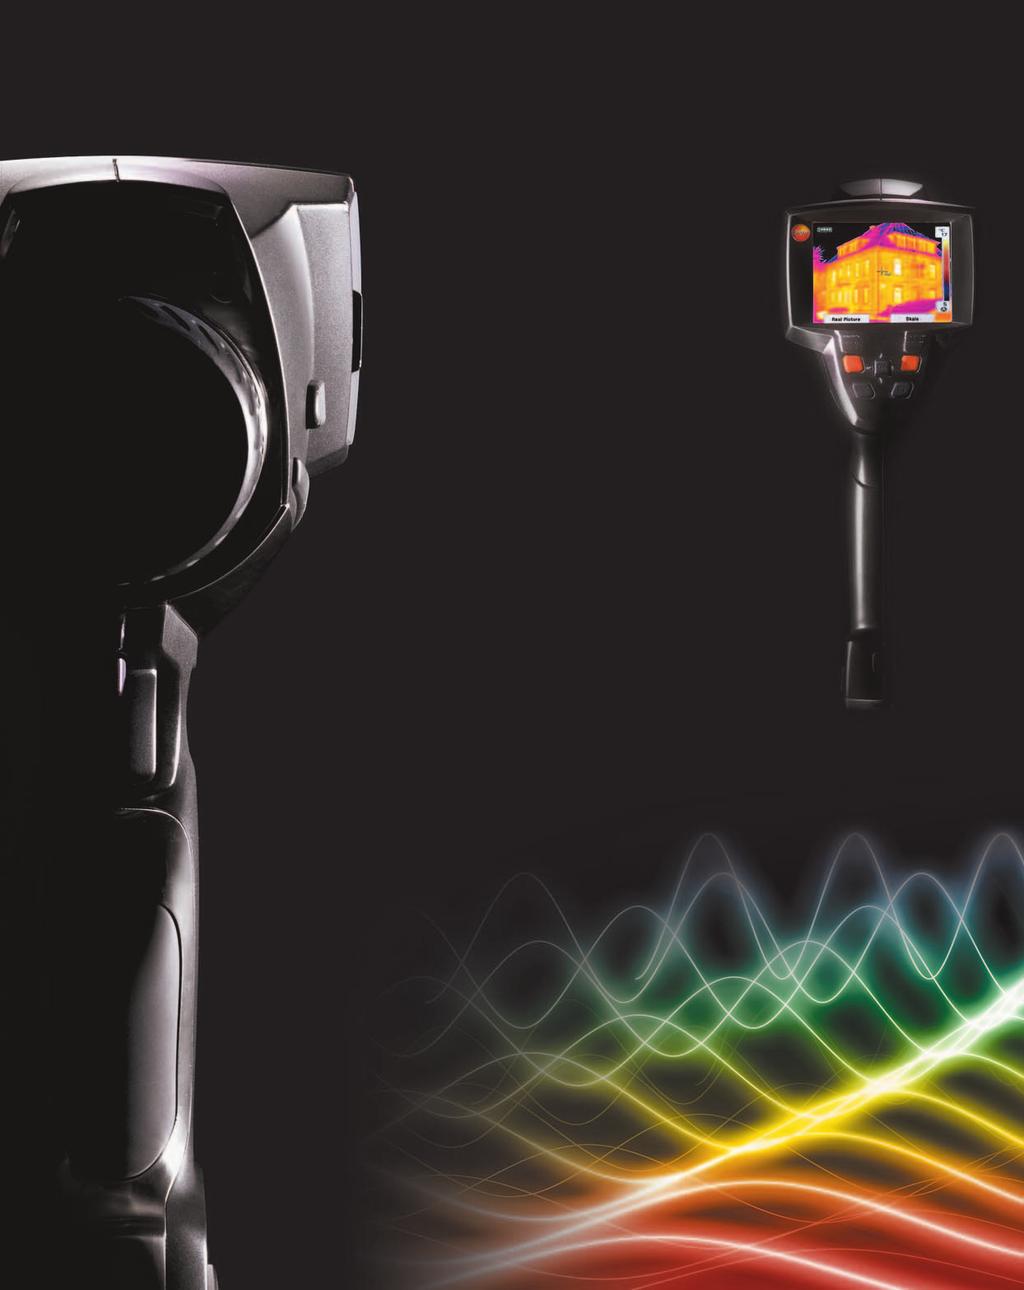 880 thermal PRO The testo 880 thermal PRO is an innovative new imager/camera that lets you actually see heat.